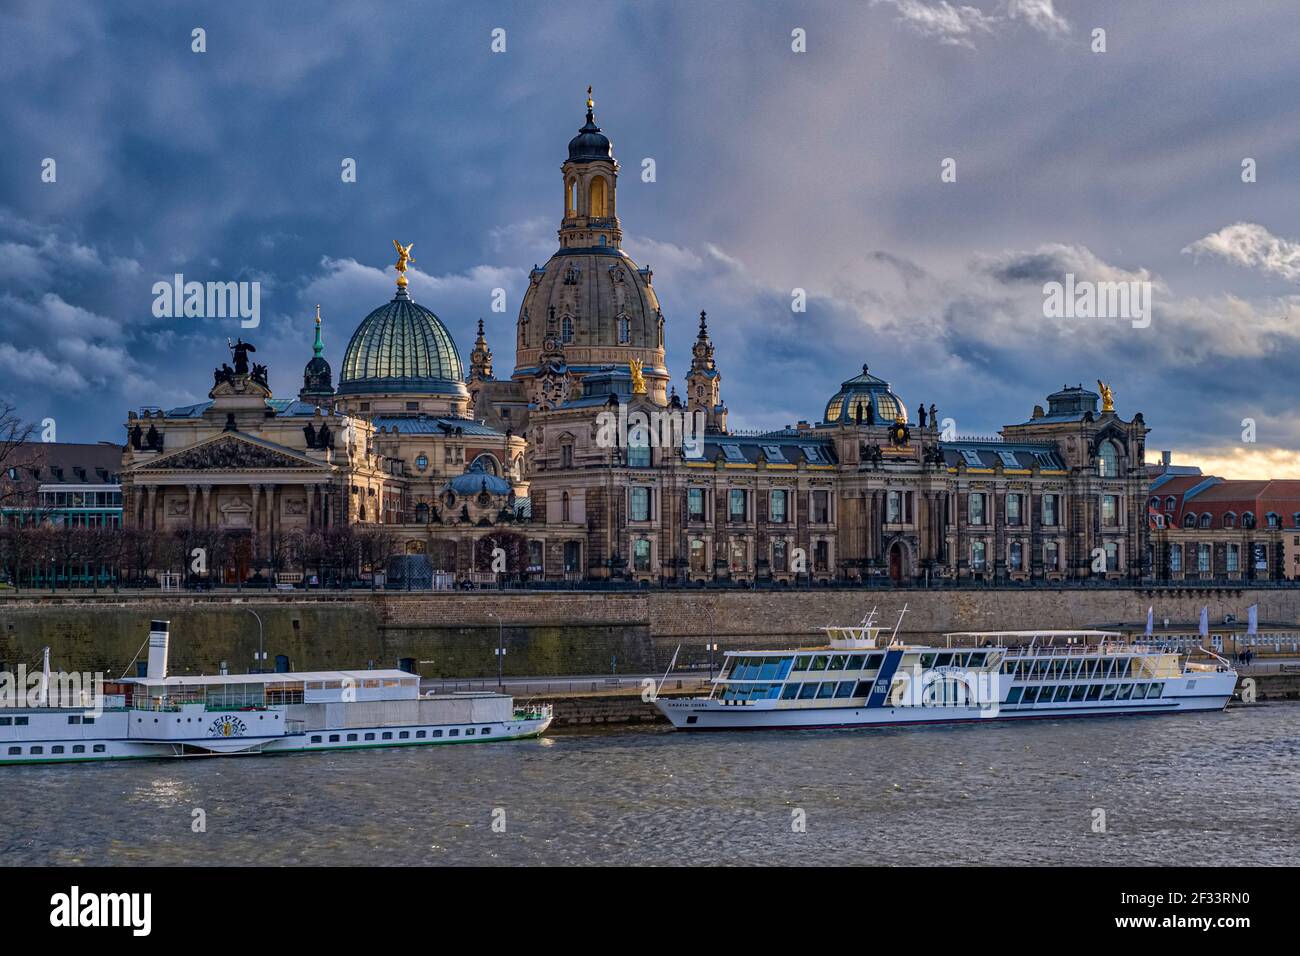 Dark storm clouds gather over the Church of our Lady and the Albertinum in the old part of town, seen across the river Elbe. Stock Photo